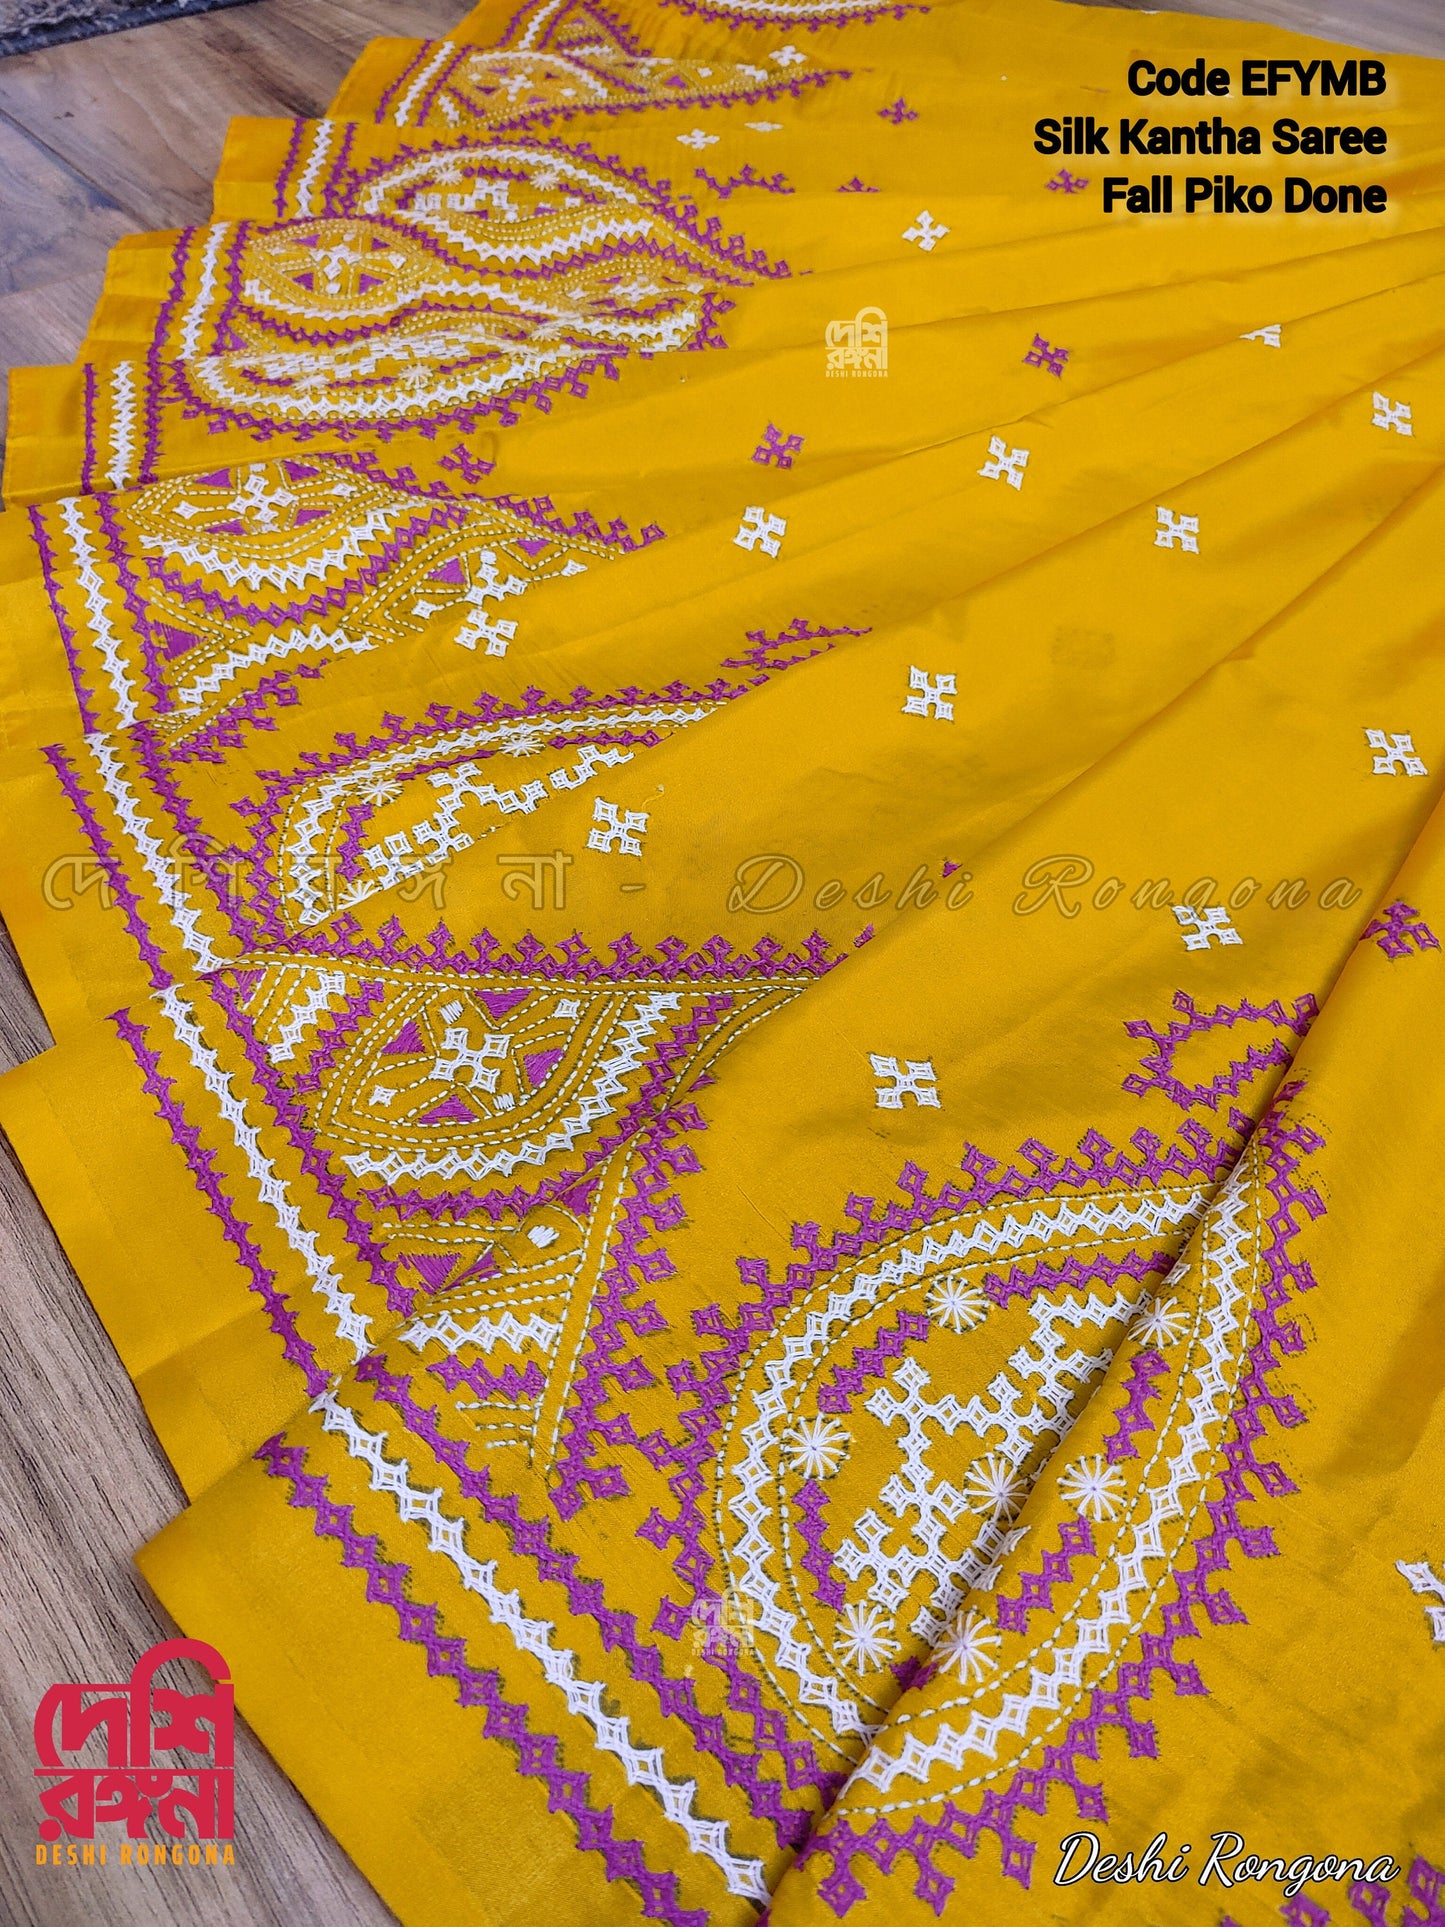 Extraordinary Hand Stiched Kantha Saree, Yellow Bangalore Silk with Purple Gujrati Kantha Works, Fall piko done, Unstitched Blouse piece